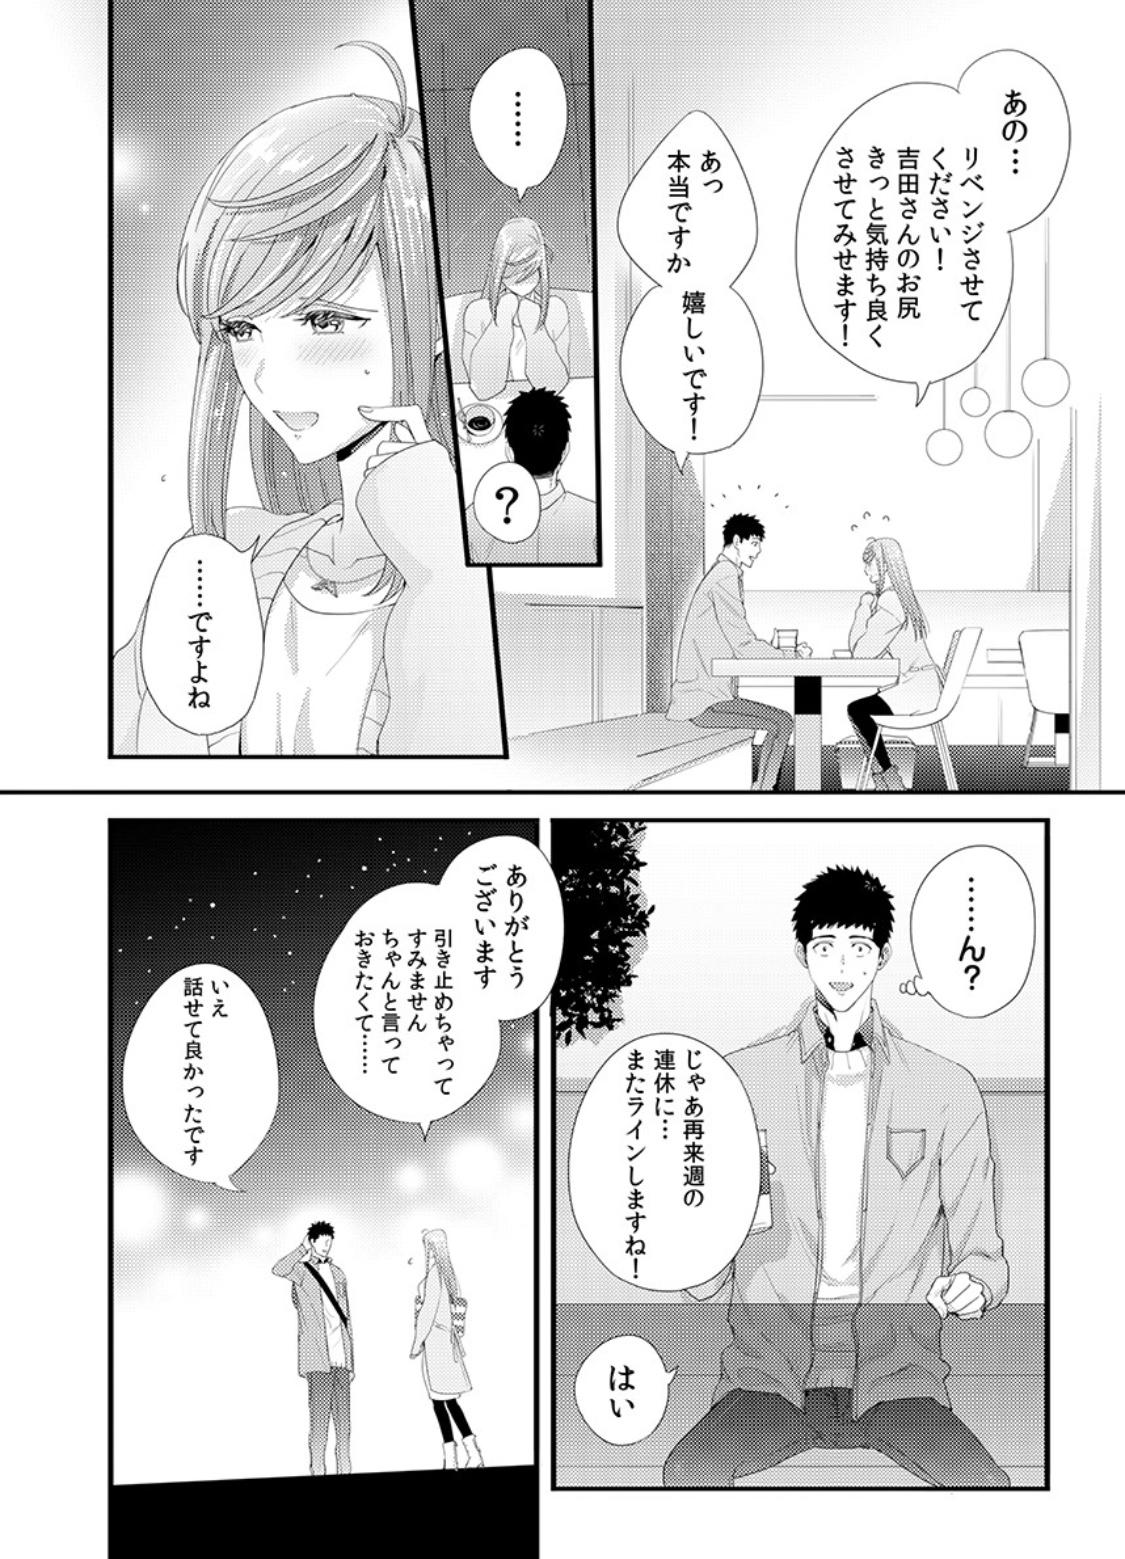 Please Let Me Hold You Futaba-San! Ch. 1-4 37